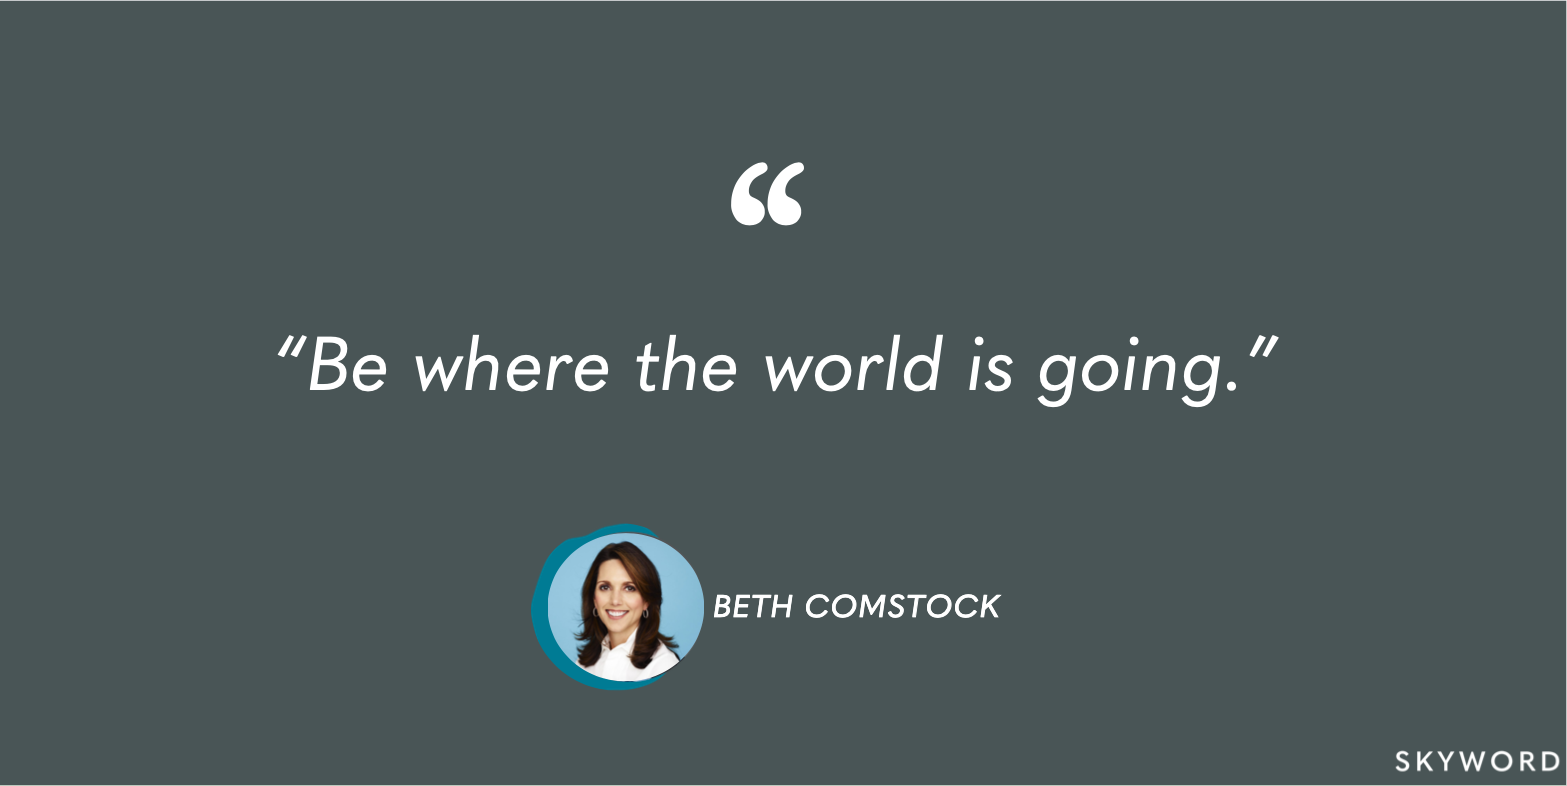 beth comstock innovation quote